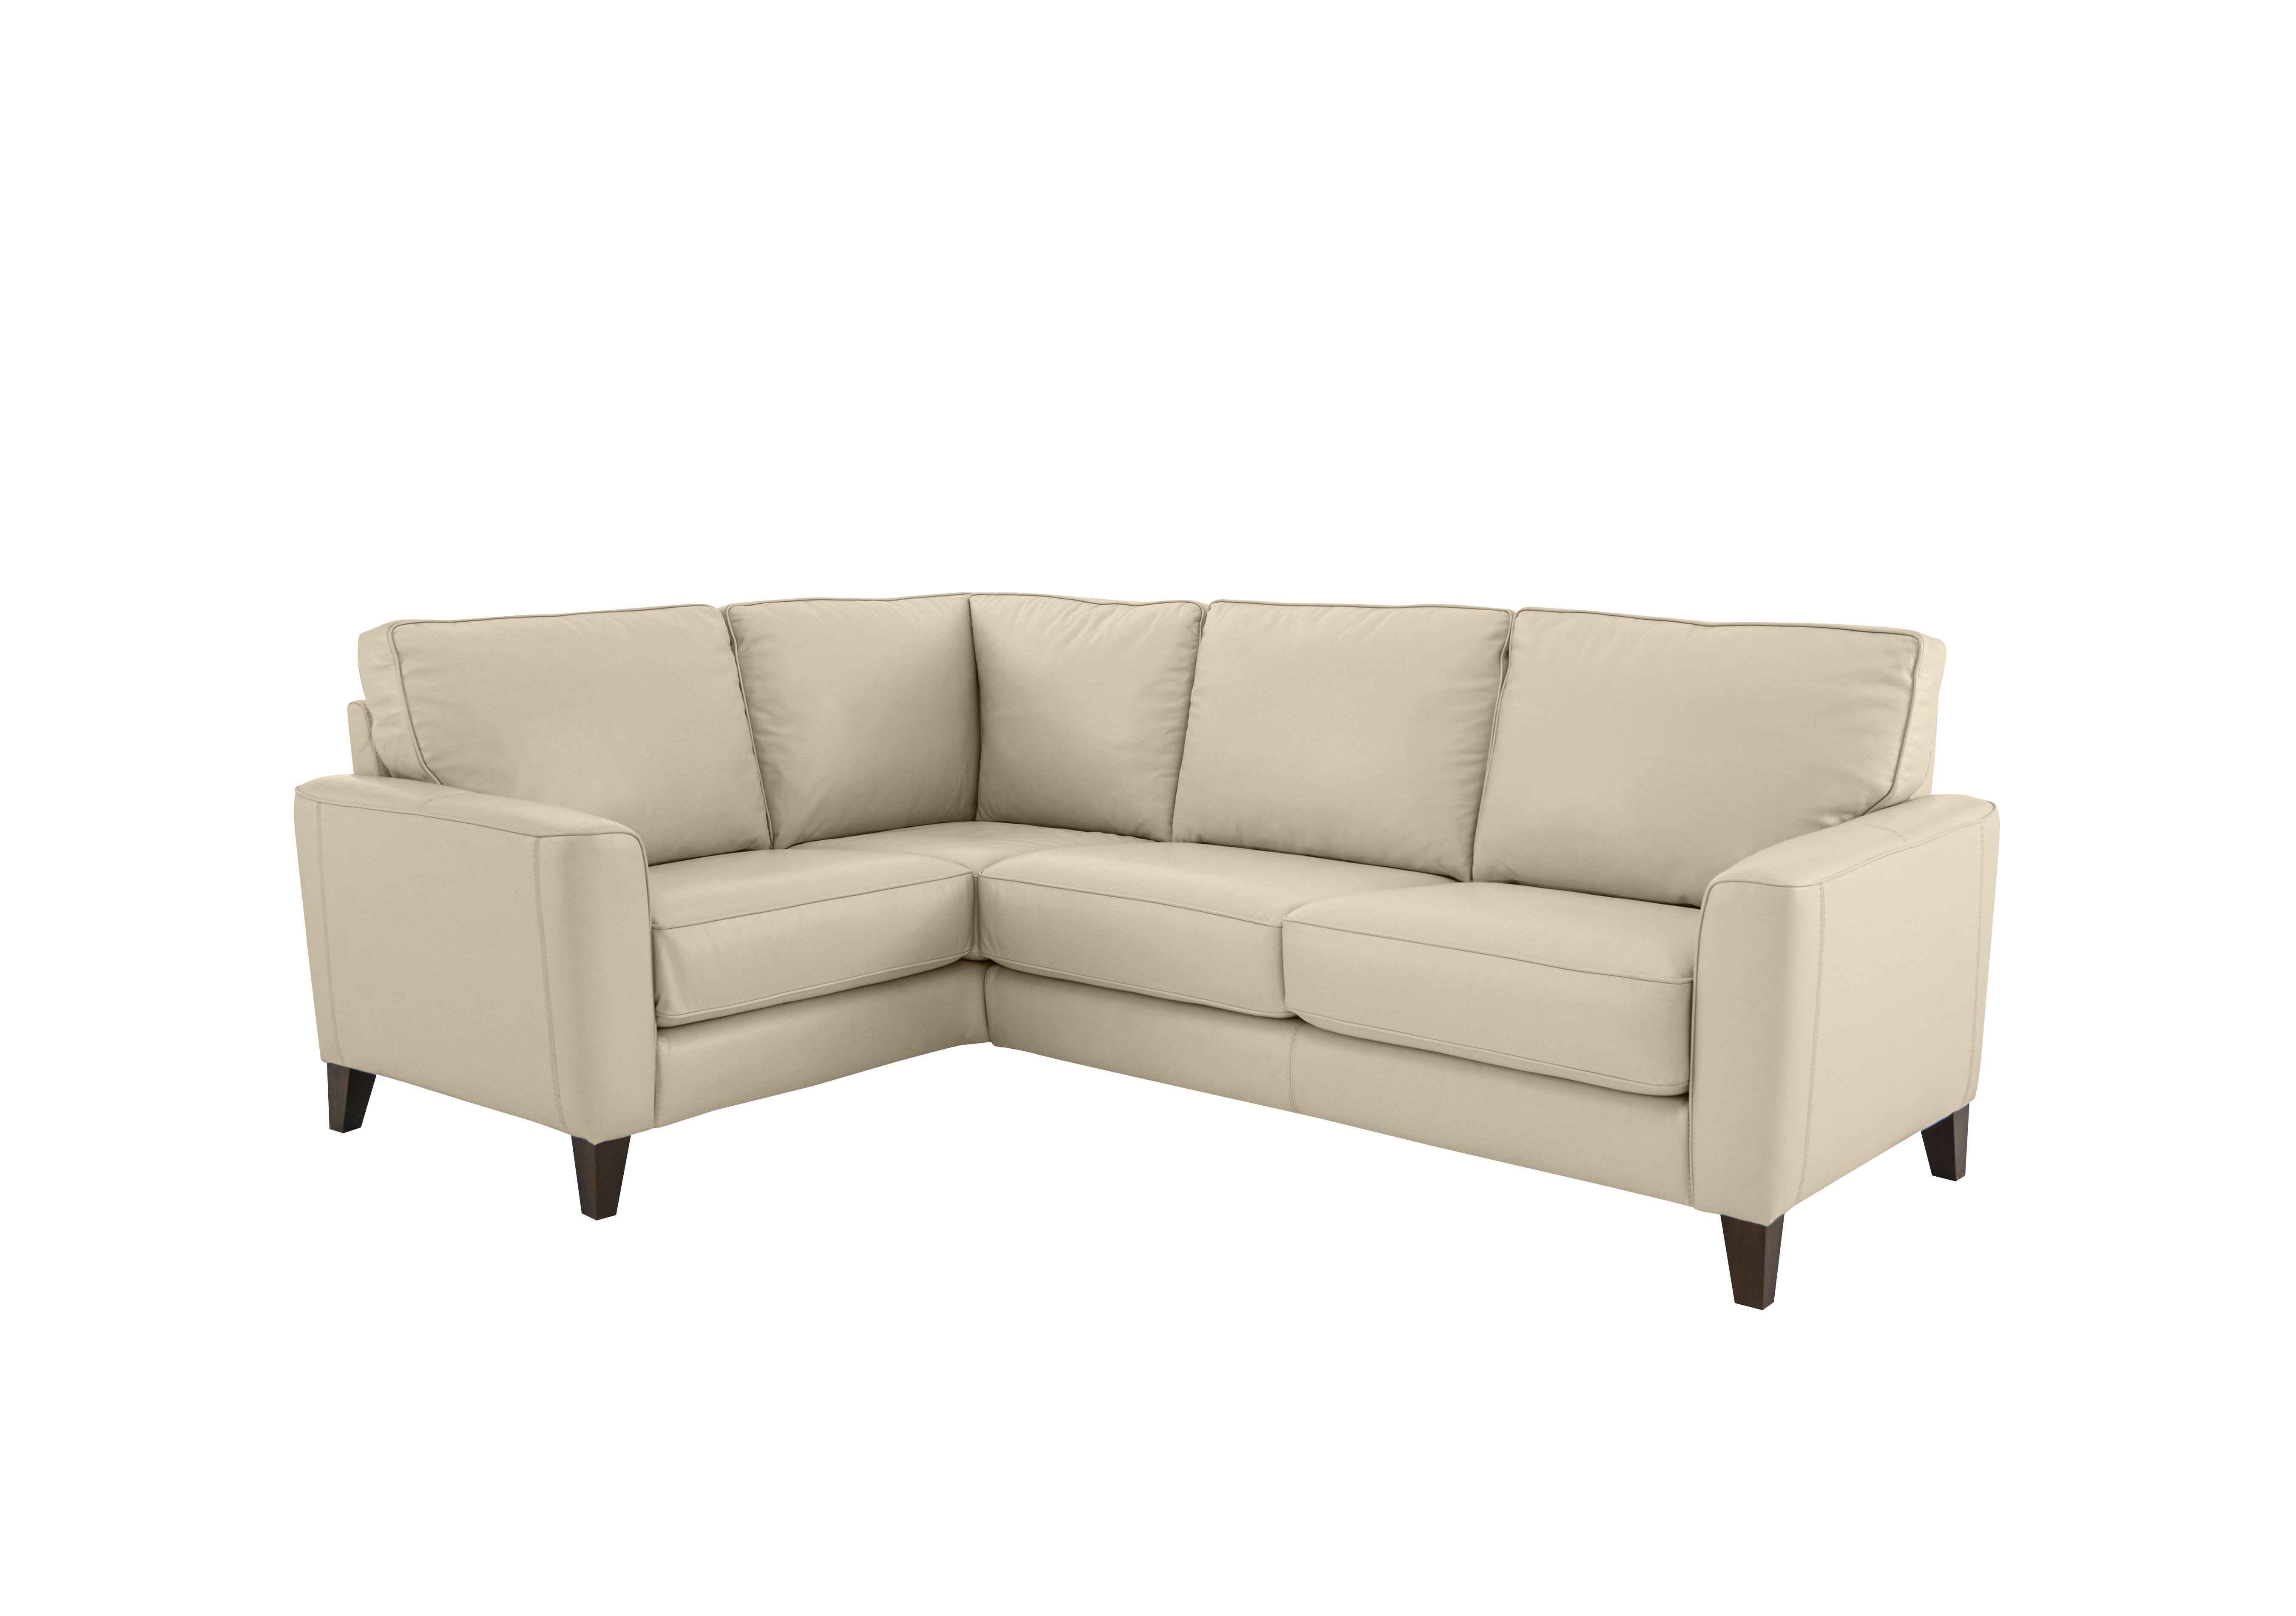 Brondby Small Leather Corner Sofa in Bv-862c Bisque on Furniture Village